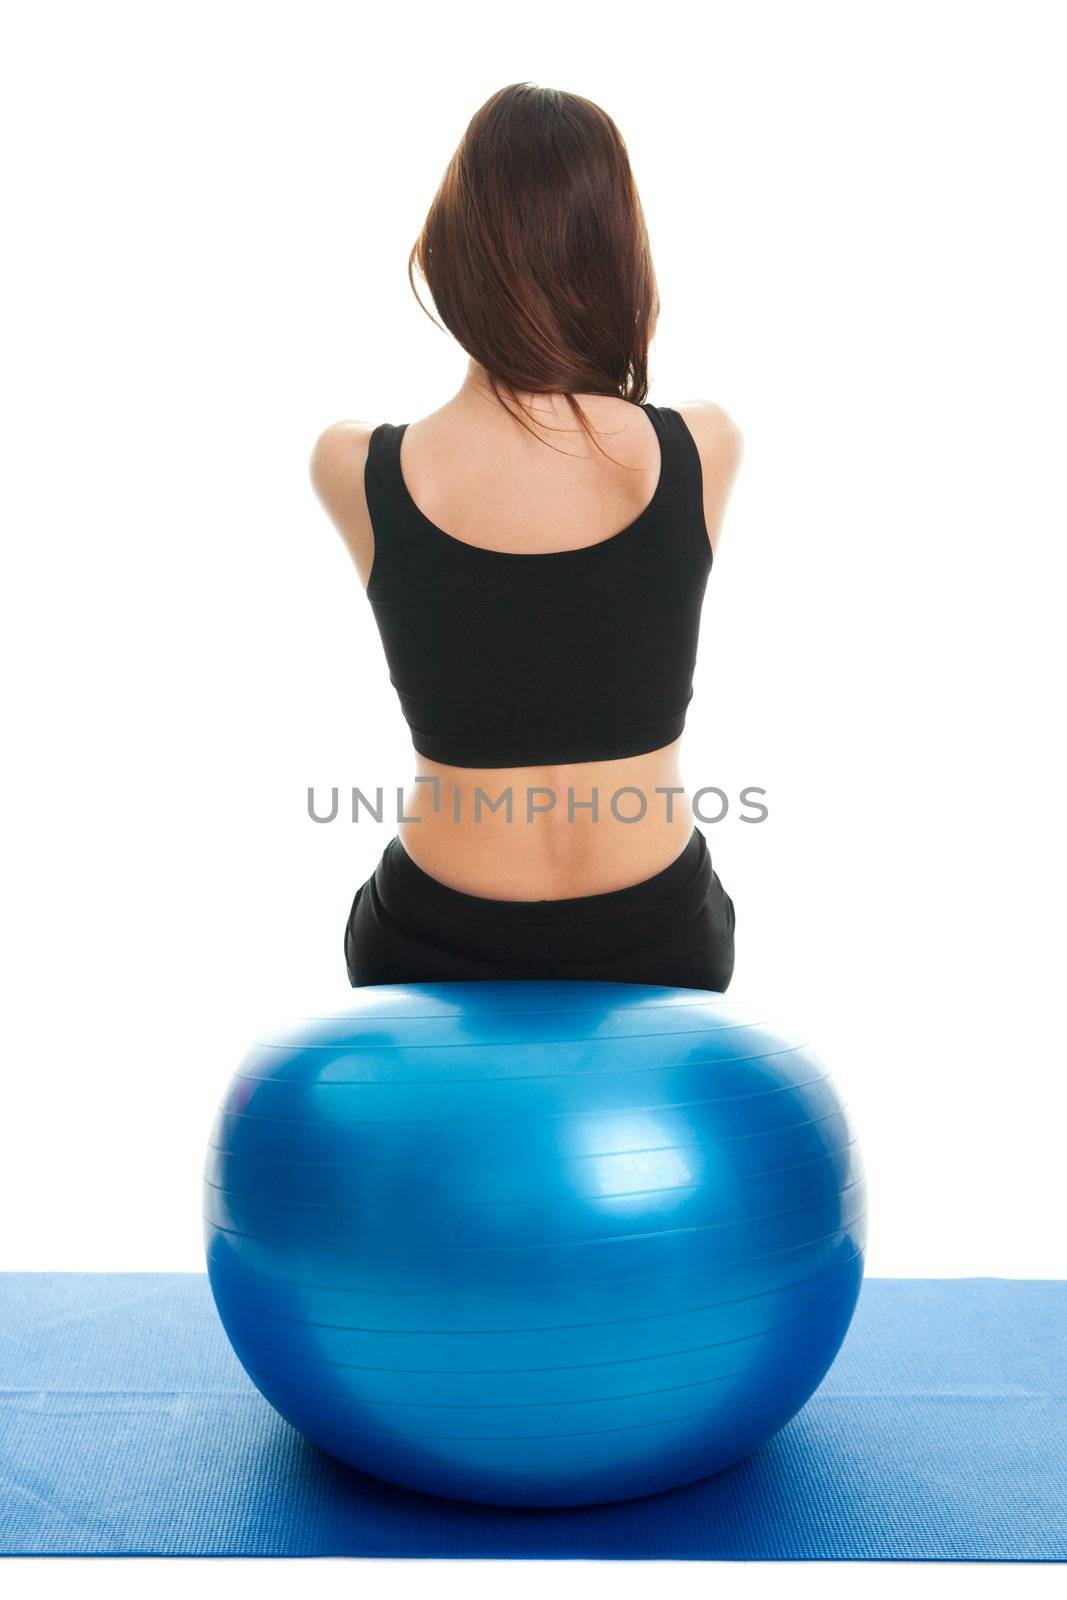 Fitness women exercising on fitness ball Shot from behind. Isolated on white